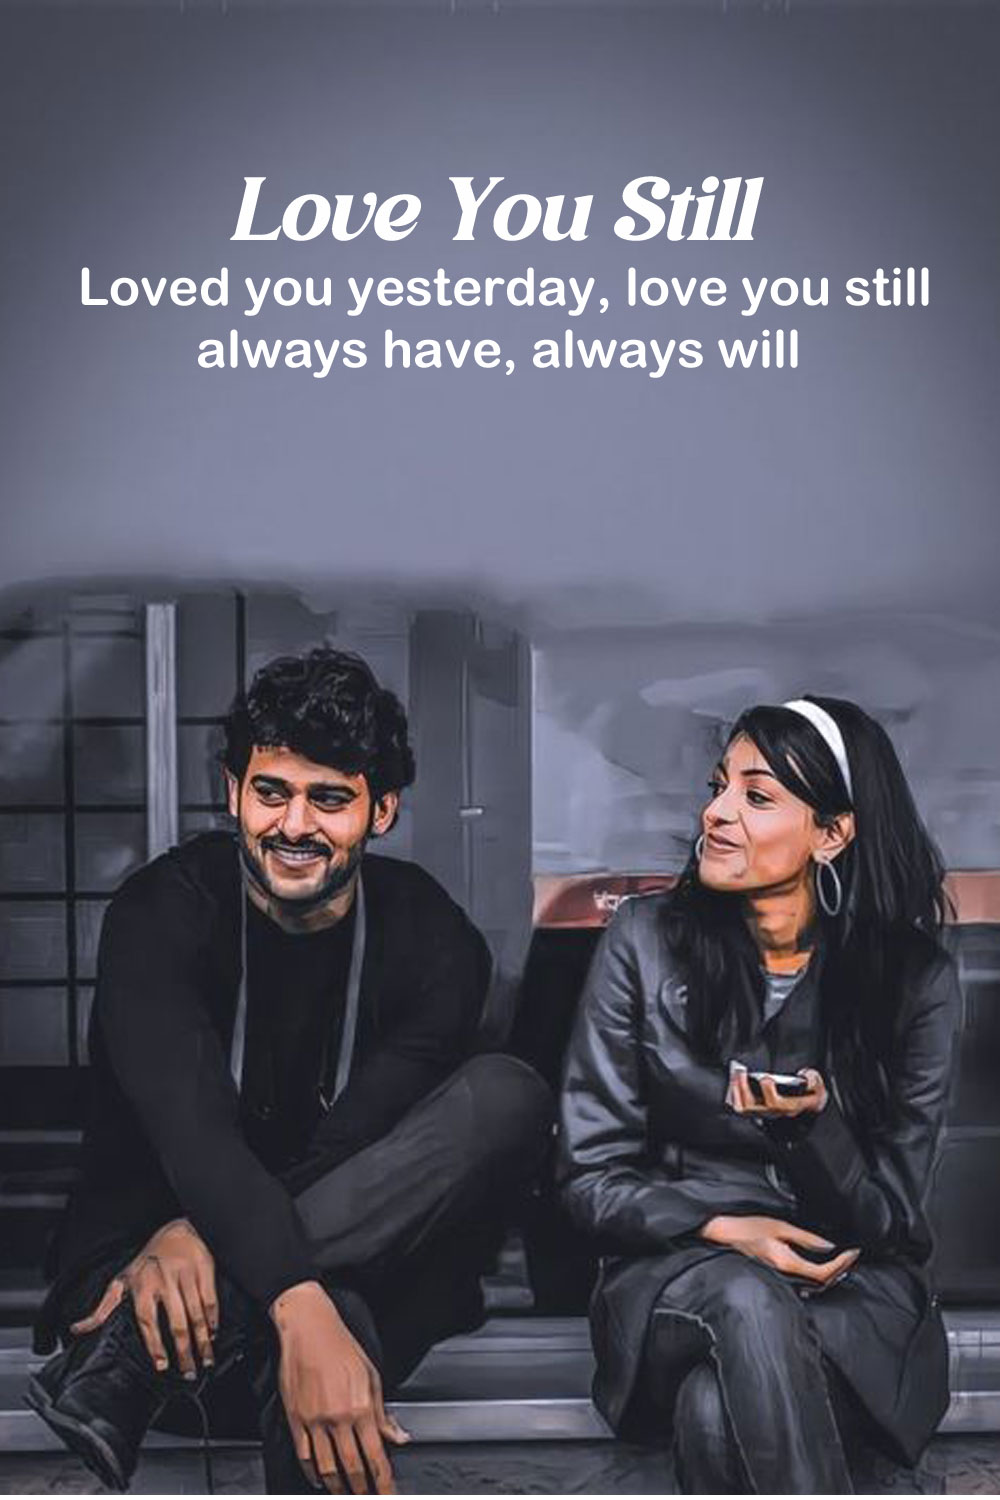 Love You Still Whatsapp Status Images - Good Morning Images, Quotes ...